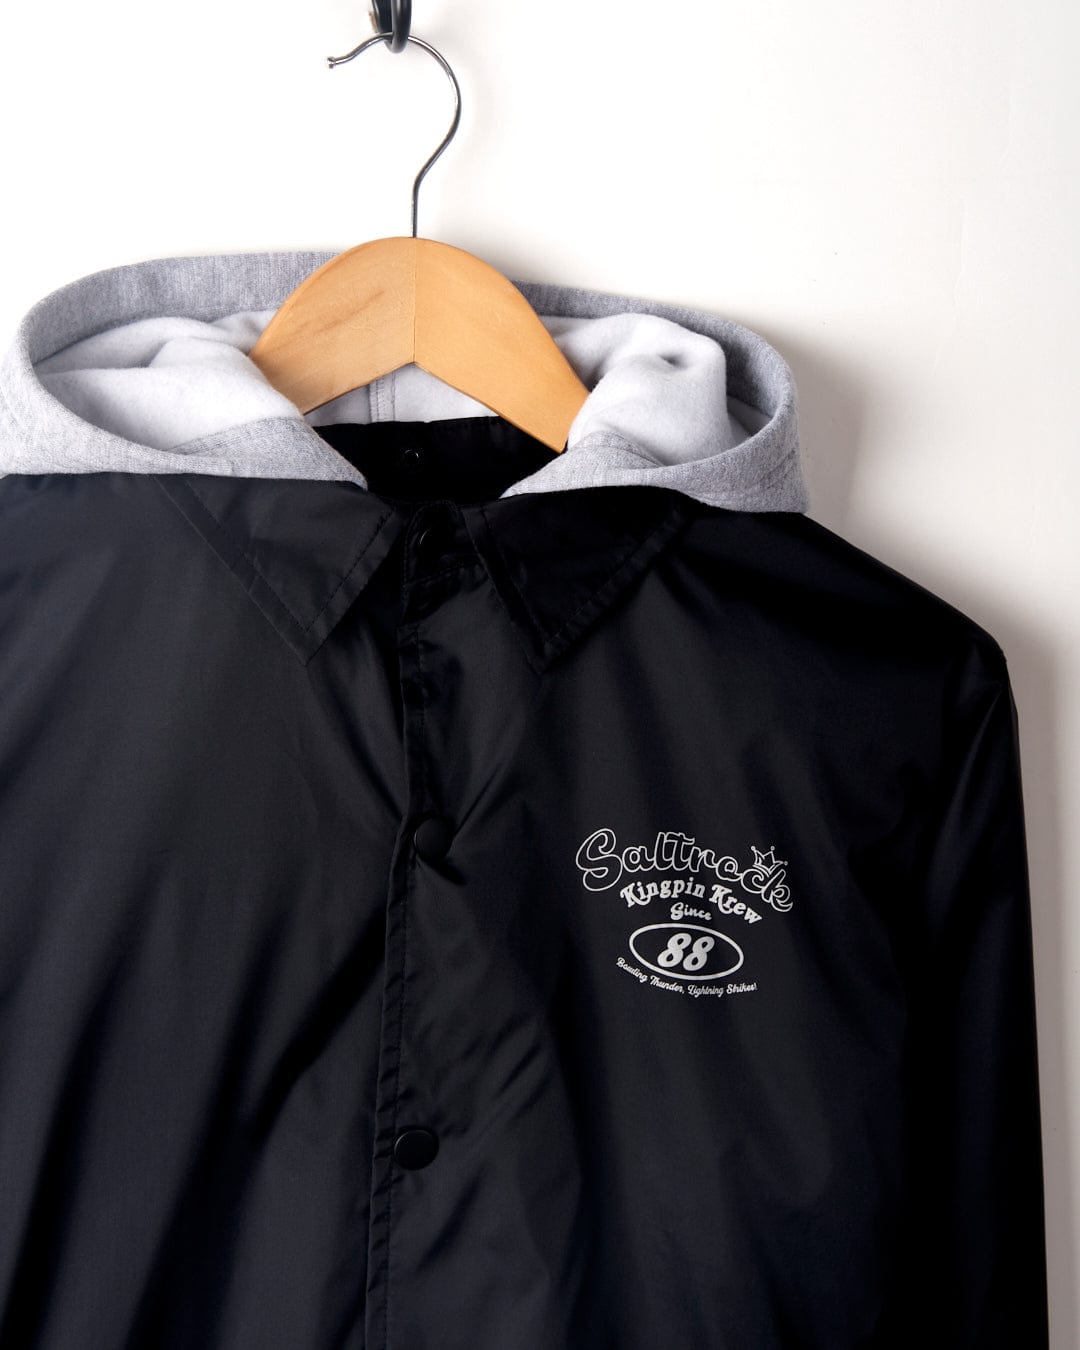 Black and gray water-resistant Kingpin Krew - Kids Coach Jacket with embroidered logo "sailor's creek 88" hanging on a wooden hanger against a white wall. (Saltrock)